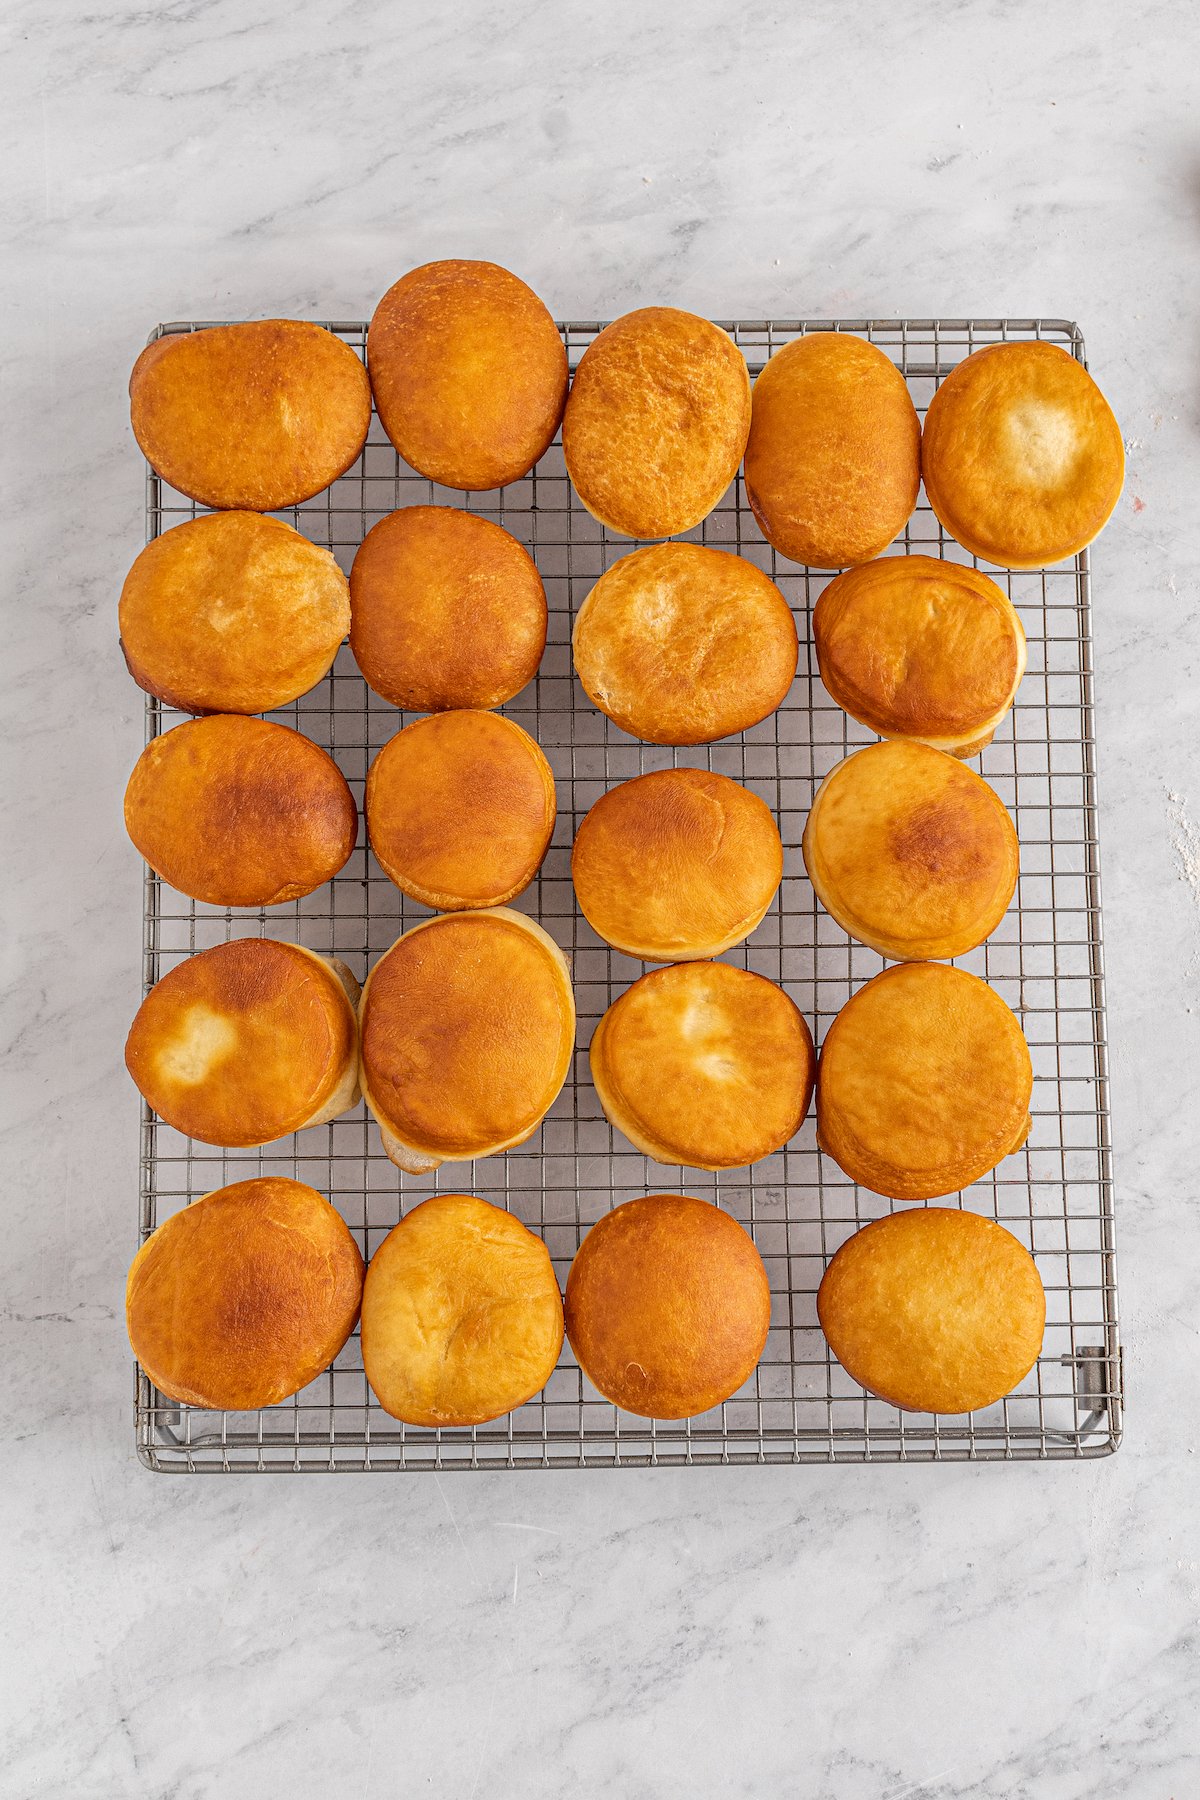 Fried, unfilled donuts on a cooling rack.